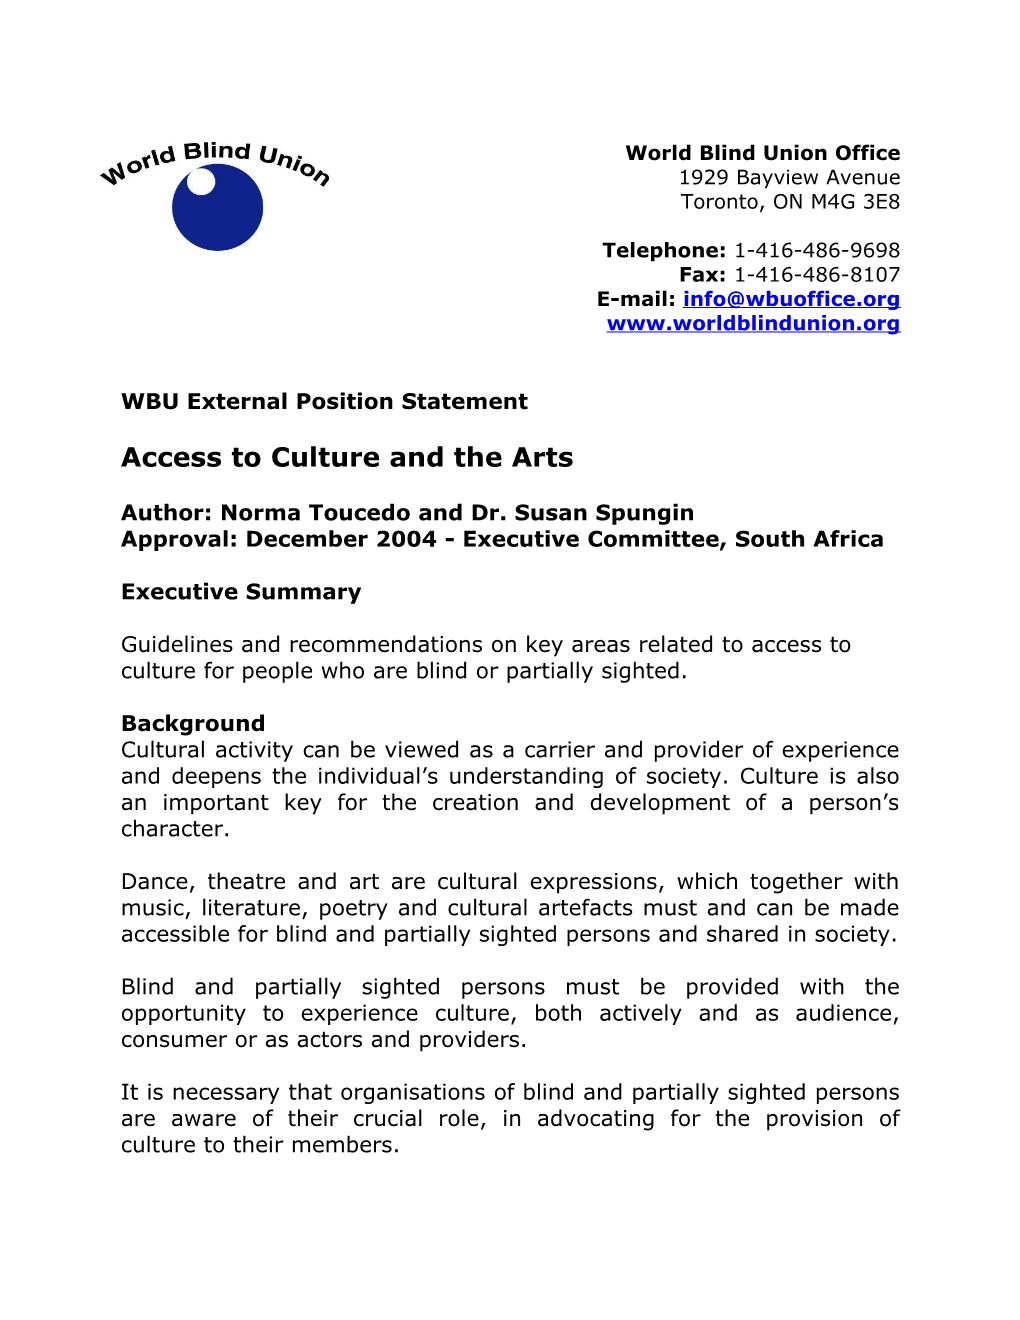 Access to Culture and Arts